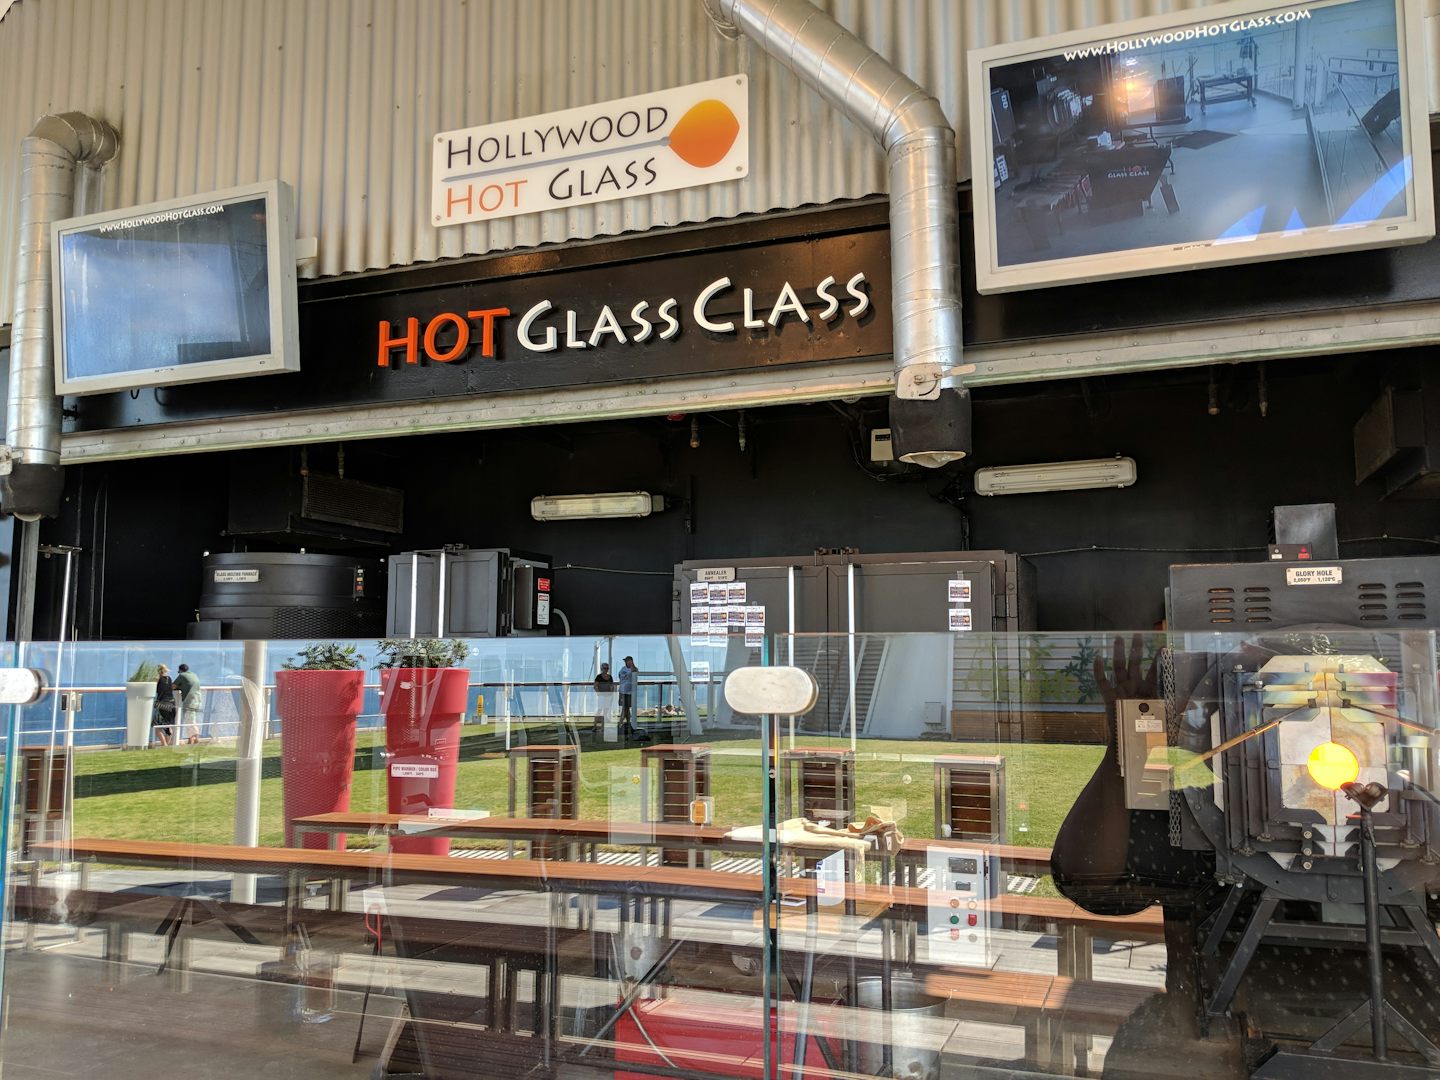 Hot Glass Show on the ship. Demonstration and interactive as well.